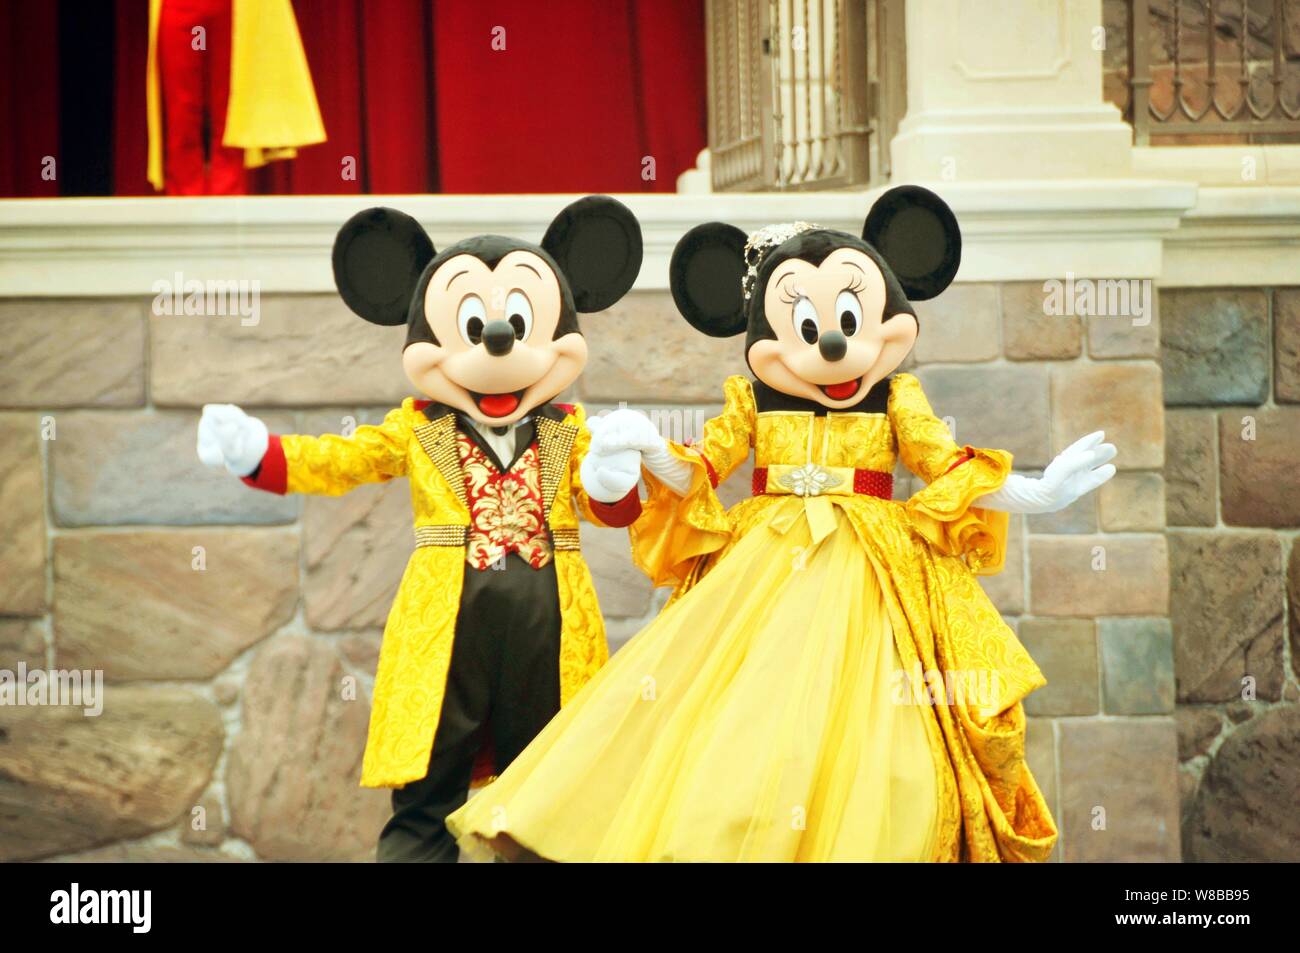 Entertainers dressed in Mickey Mouse and Minnie Mouse costumes perform in the Shanghai Disneyland at the Shanghai Disney Resort in Pudong, Shanghai, C Stock Photo - Alamy